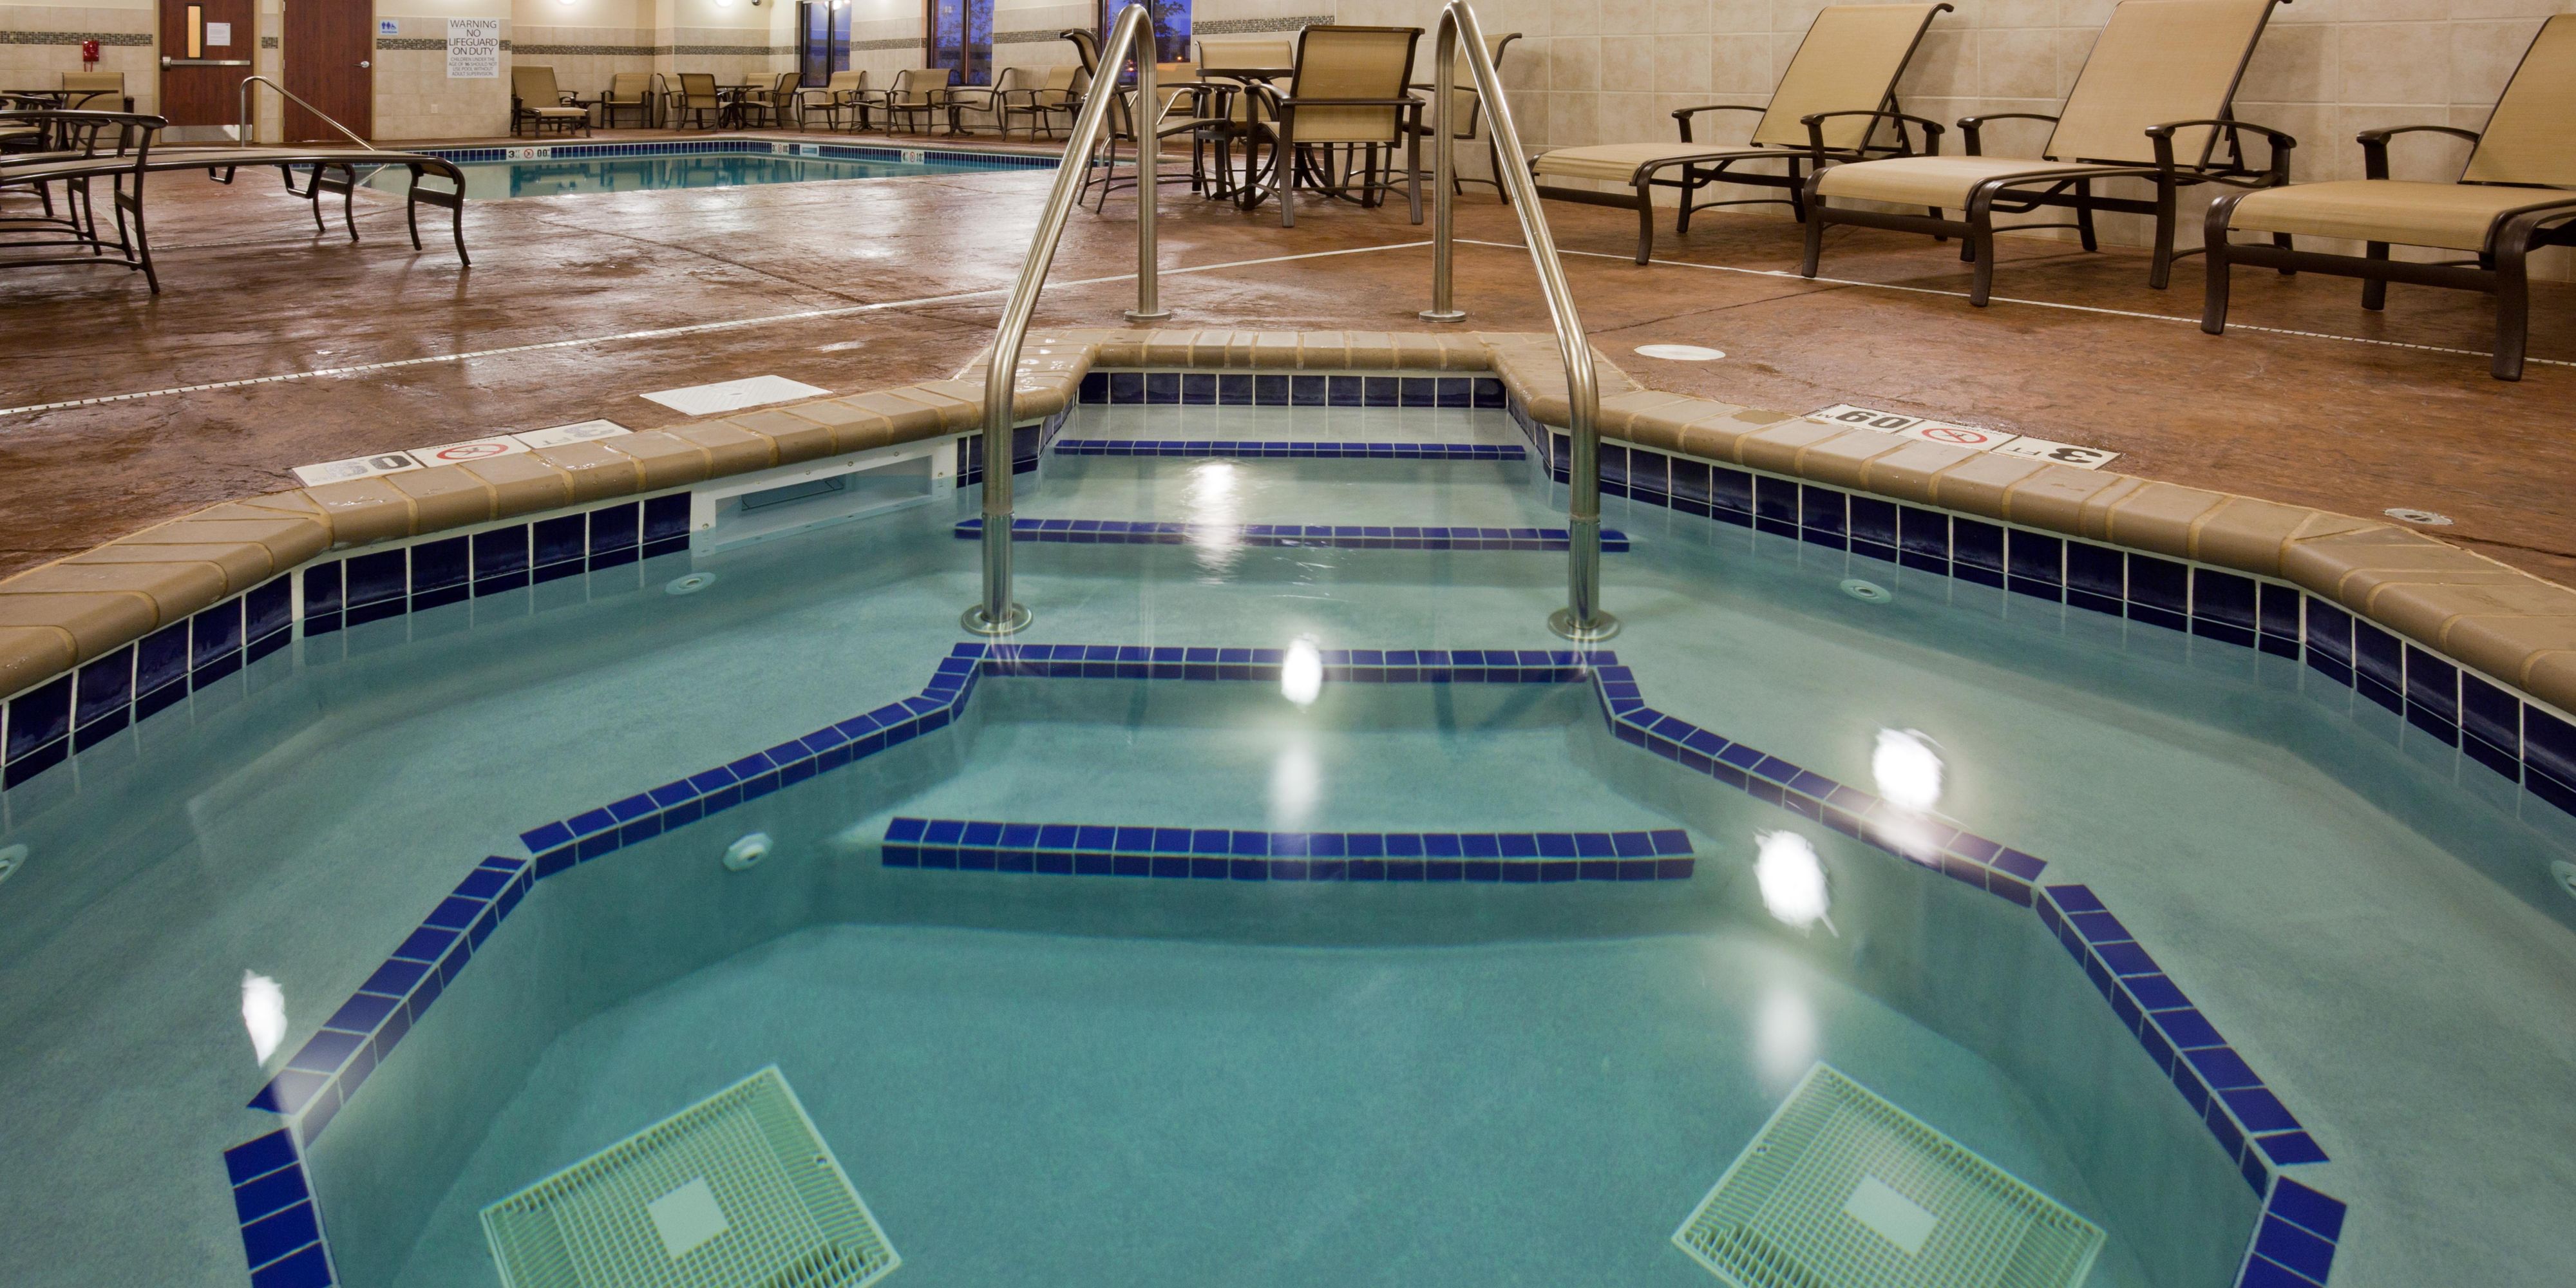 Check out our pool and fitness room located on the first floor of our hotel. Our pool area also contains a jacuzzi and is great if you want to kick back and relax. Our fitness room has plenty of equipment for you to get your full body workout in. 